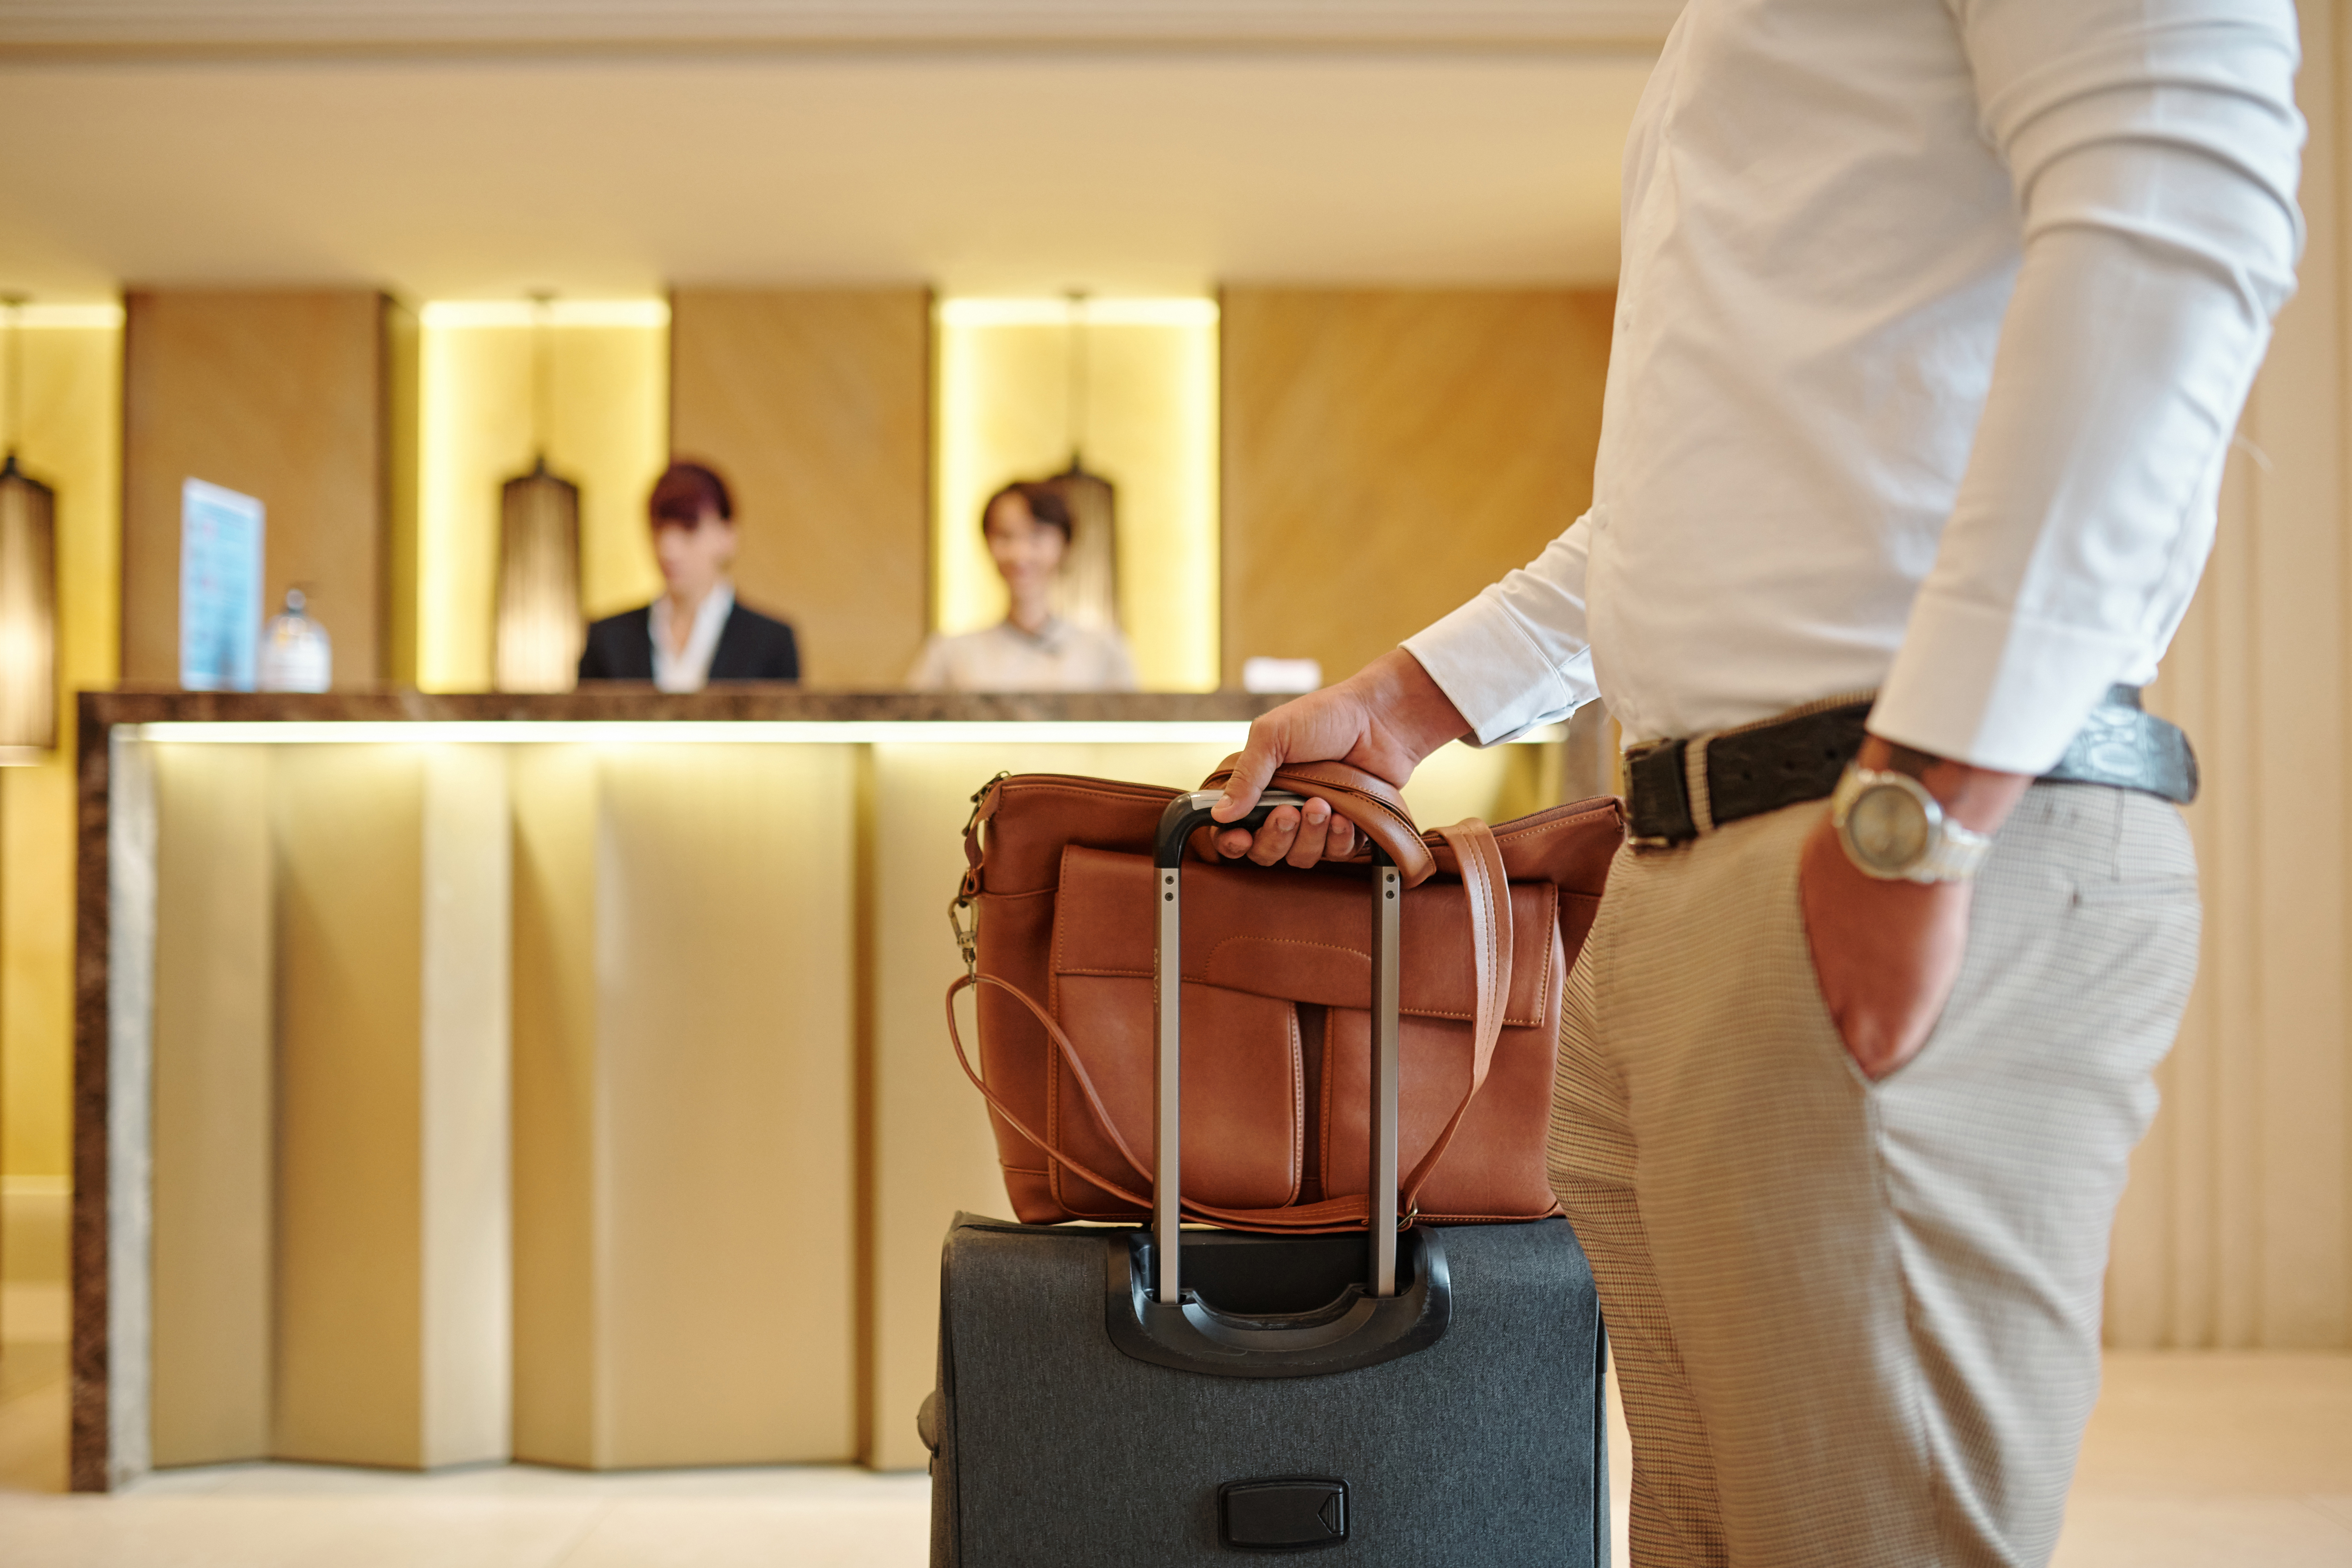 A man standing with his luggage after checking into a hotel | Source: Shutterstock